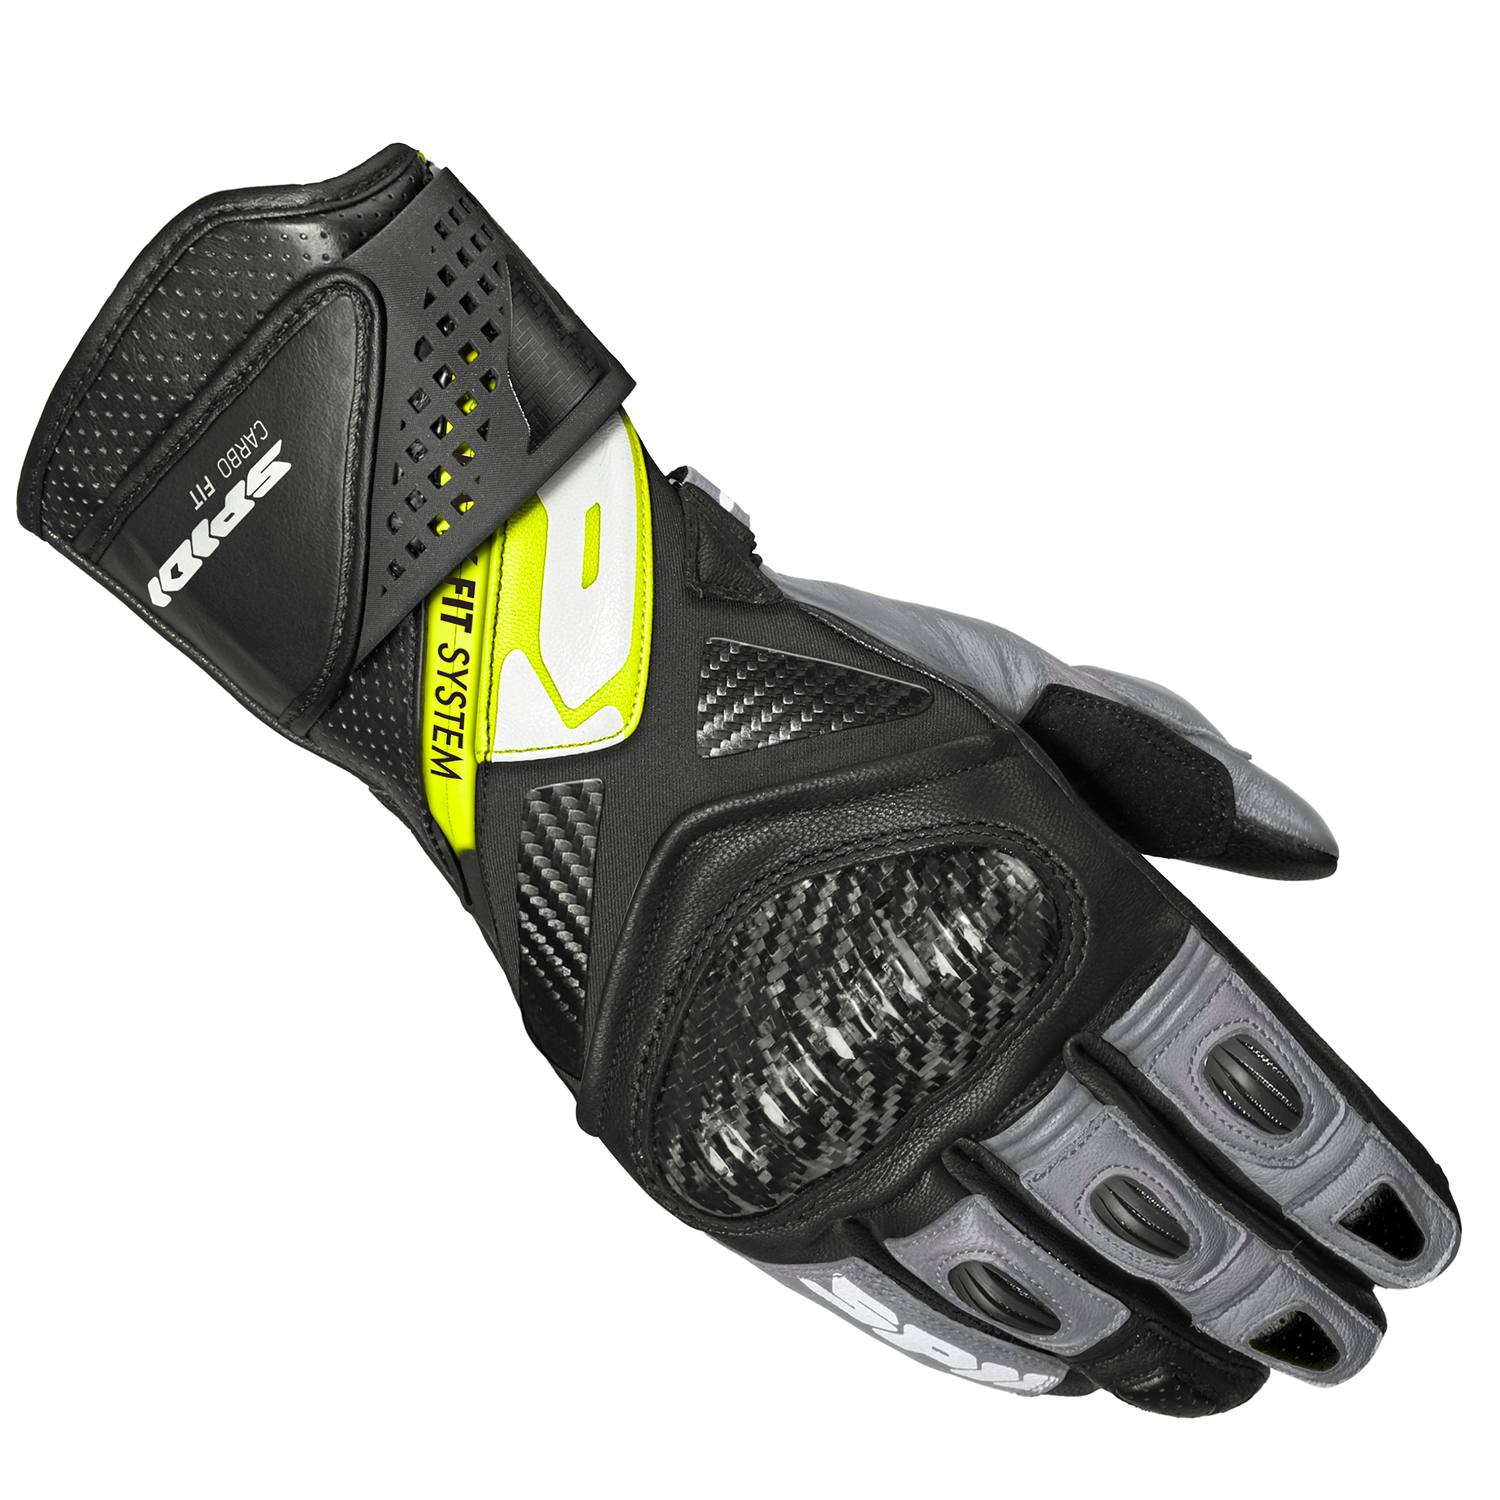 Image of Spidi Carbo Fit Gloves Black Fluorescente Yellow Size 3XL ID 8030161481587